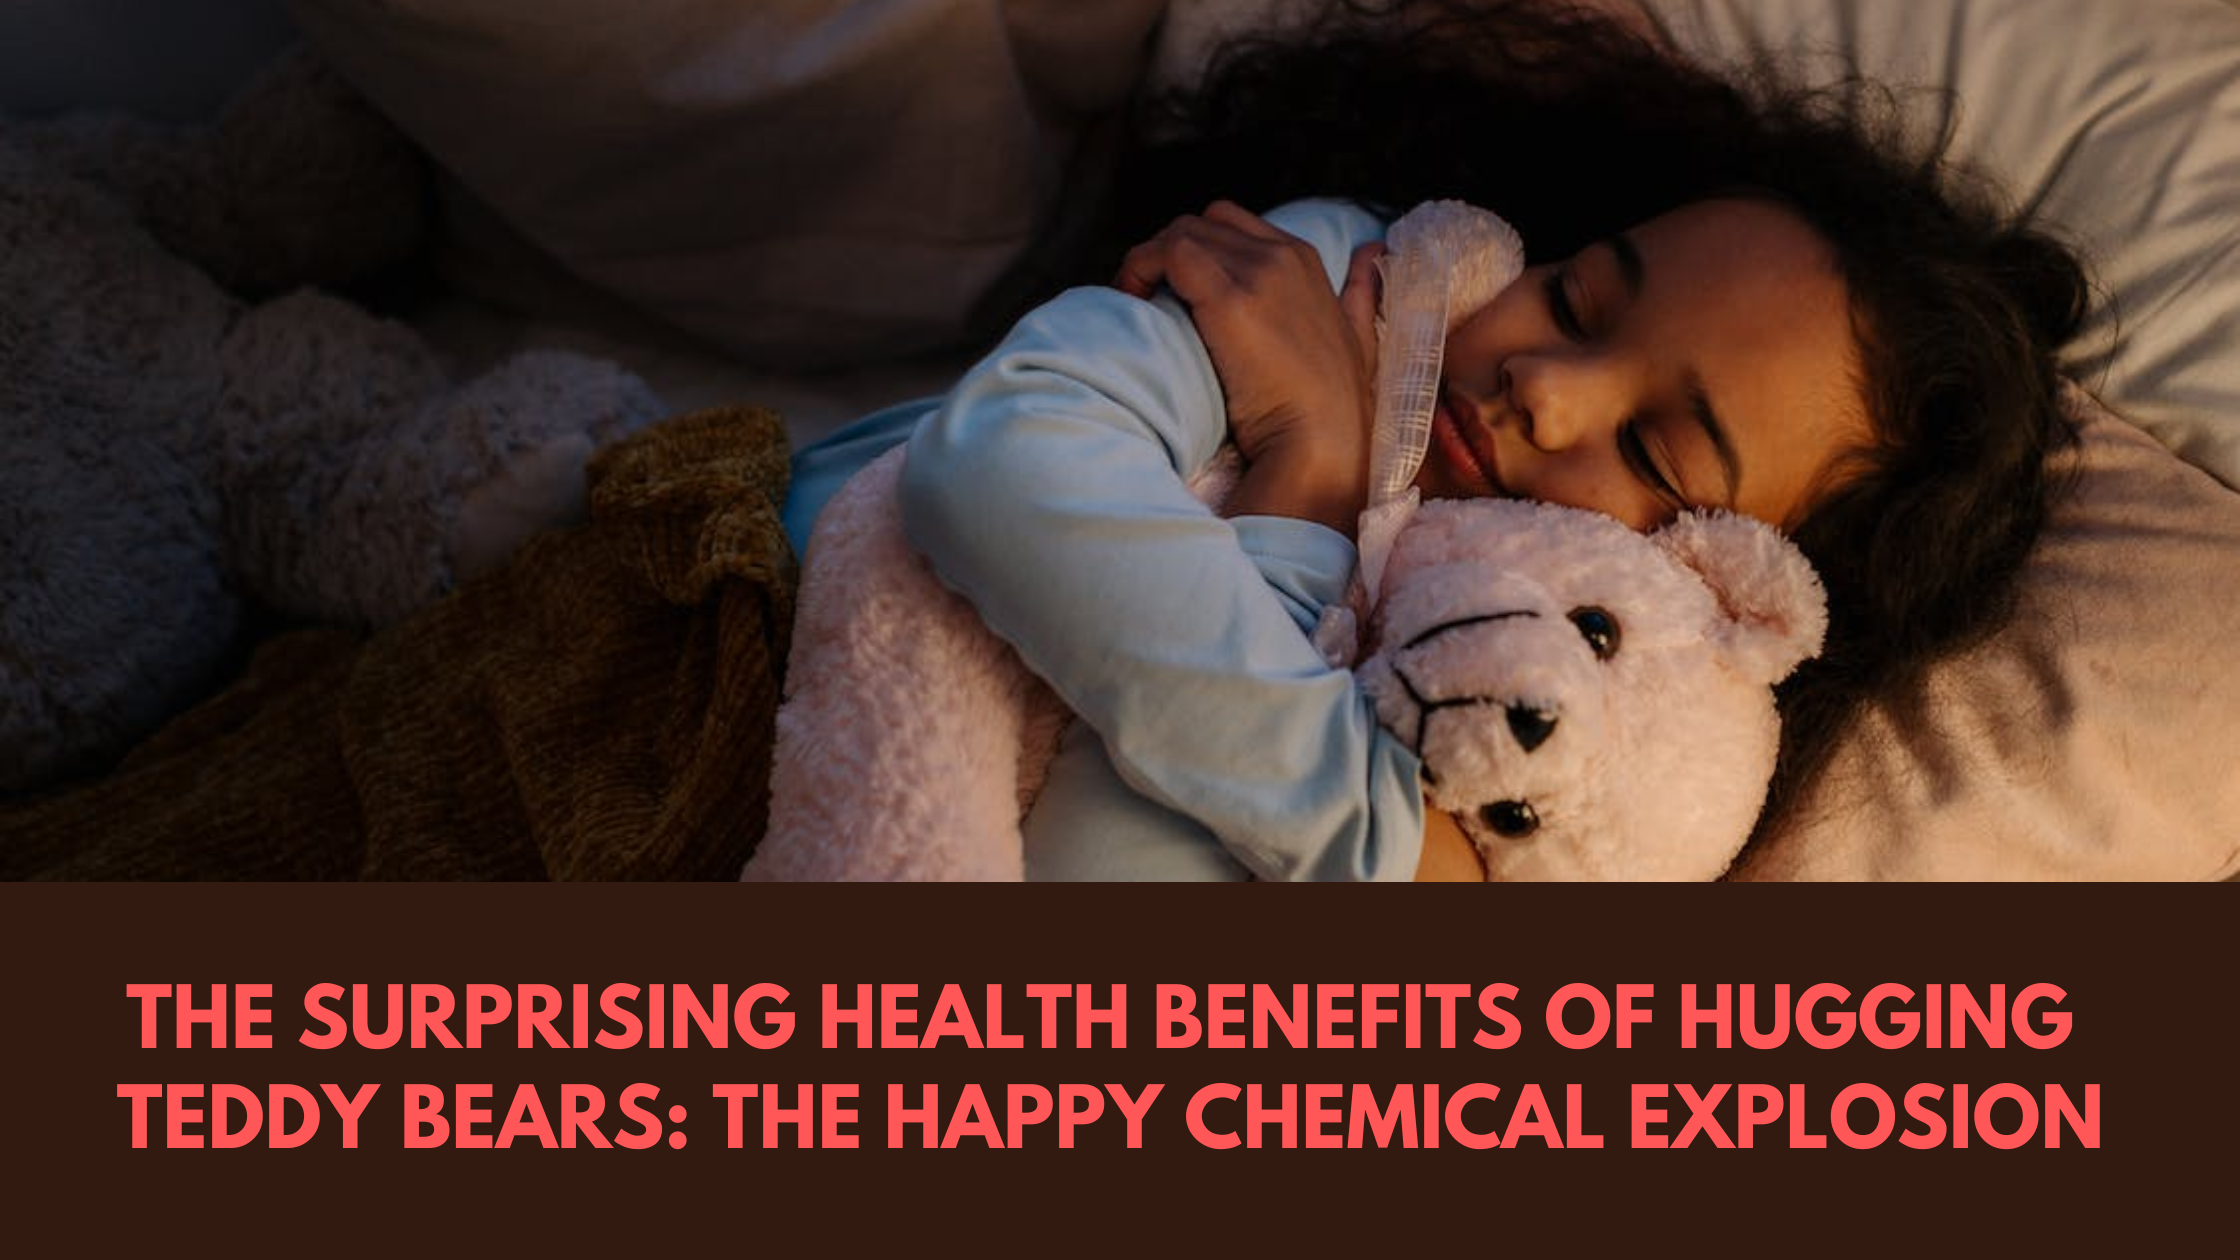 The Surprising Health Benefits of Hugging Teddy Bears: The Happy Chemical Explosion